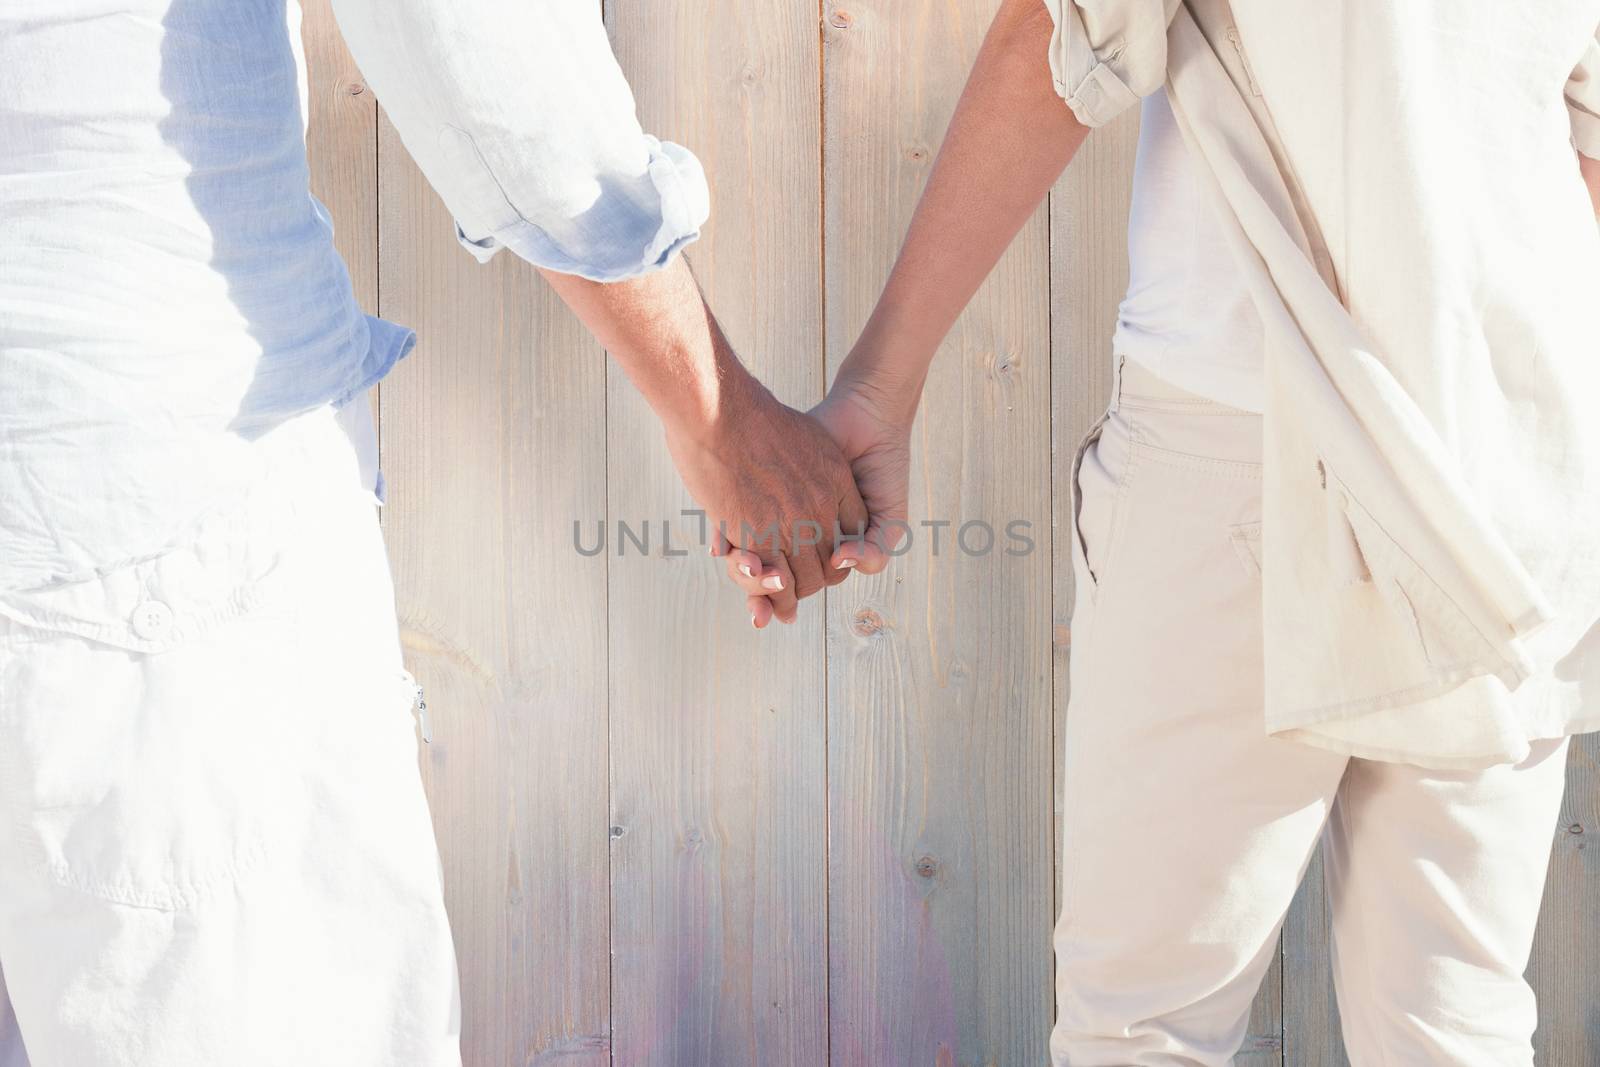 Couple on the beach looking out to sea holding hands against pale grey wooden planks